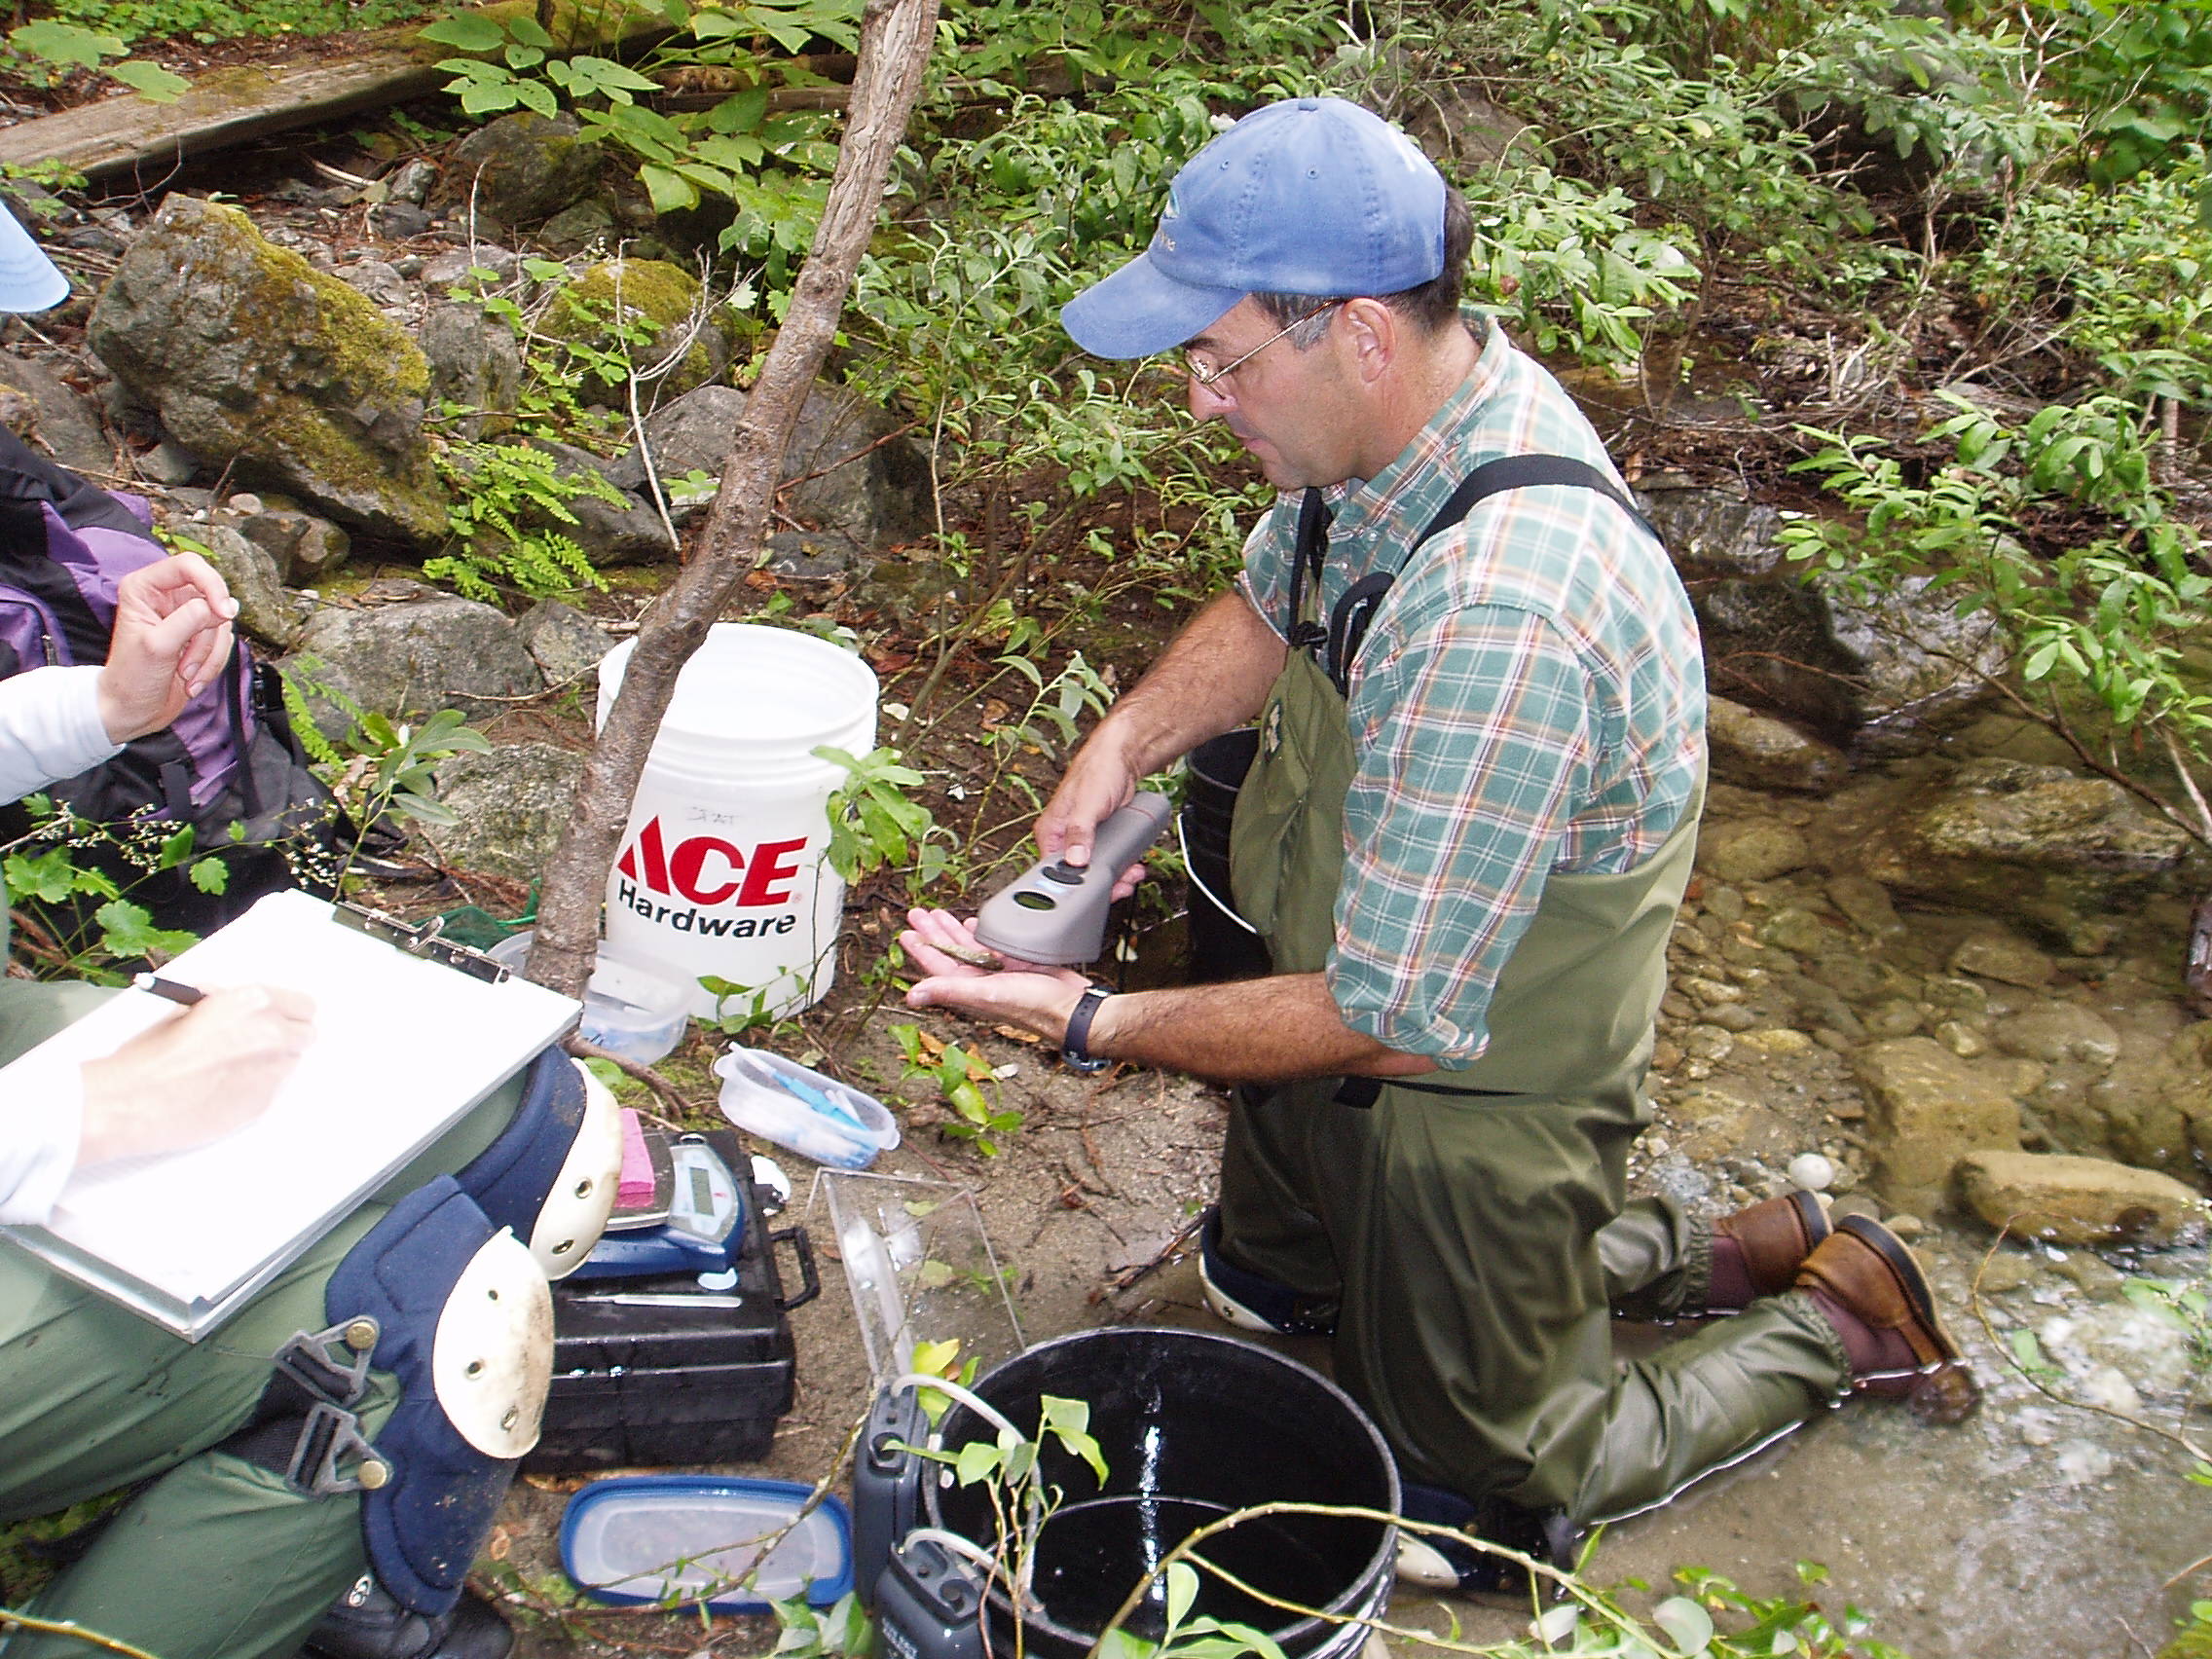 Fisheries biologist Tommy Williams scans a juvenile steelhead trout for a passive integrated transponder (PIT) tag. PIT tags uniquely identify the fish and in mark-and-recapture studies, they allow scientists to estimate fish survival rates and population size.